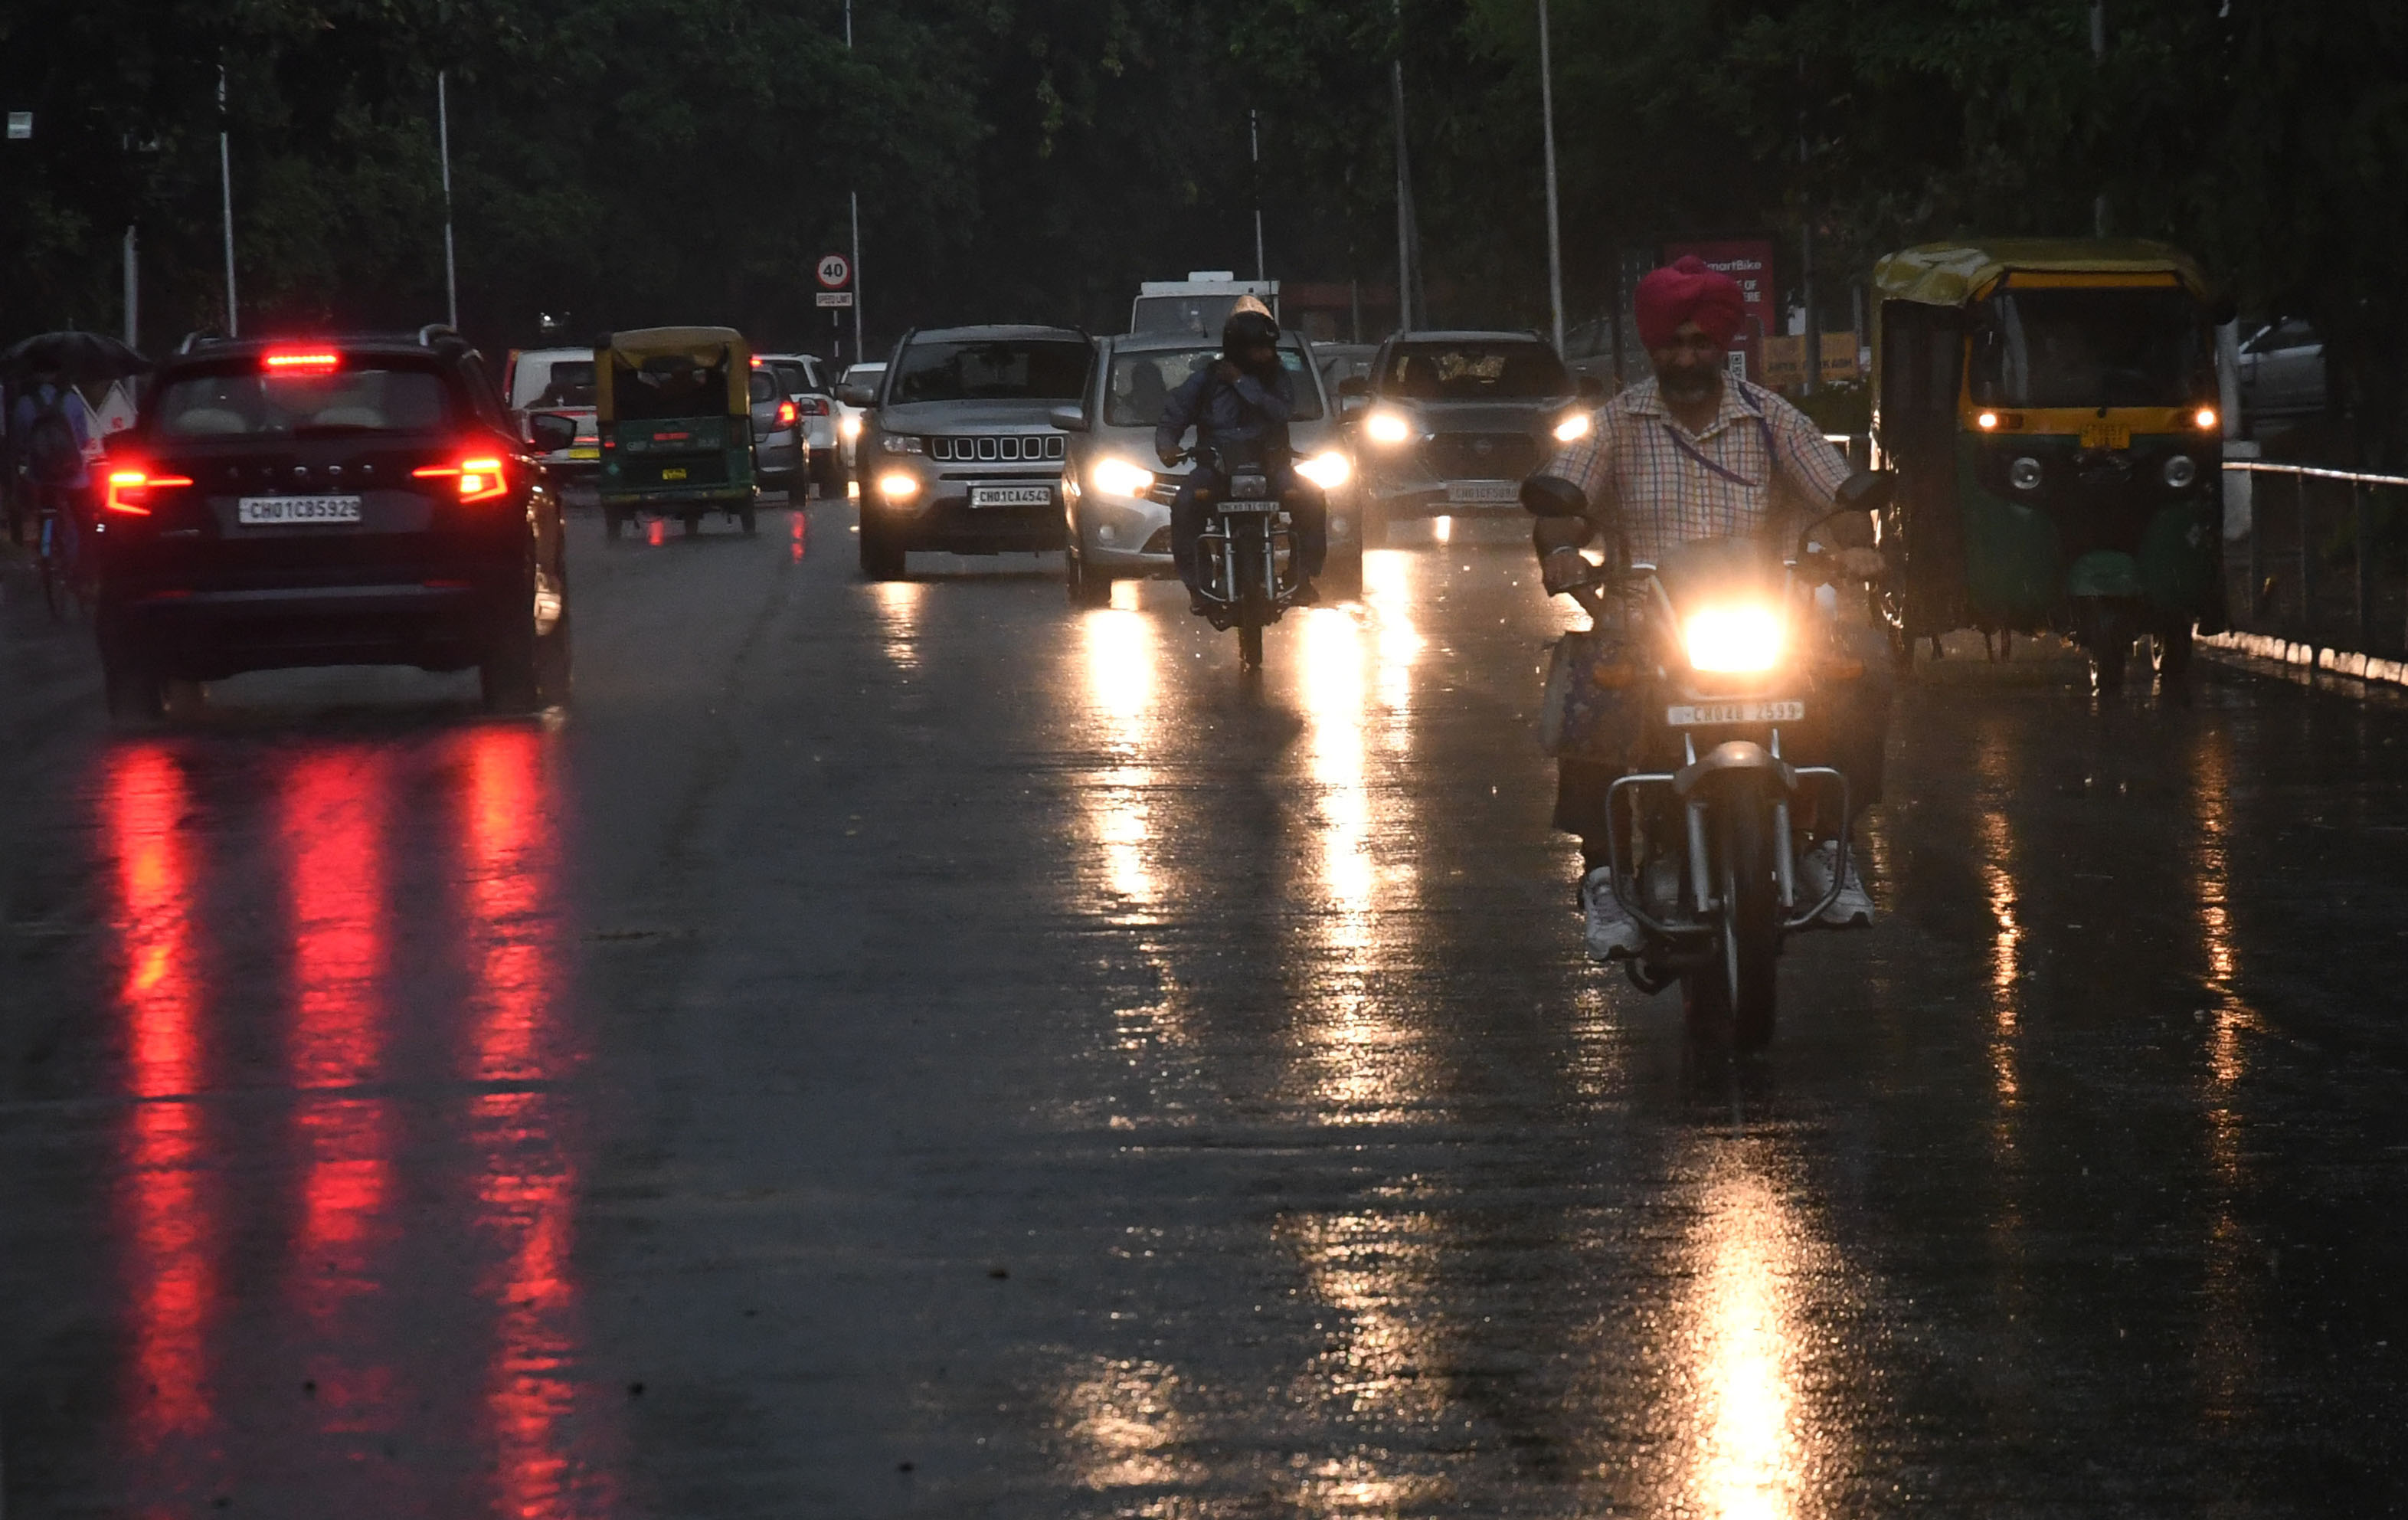 Showers bring respite in Chandigarh, monsoon in 48 hours